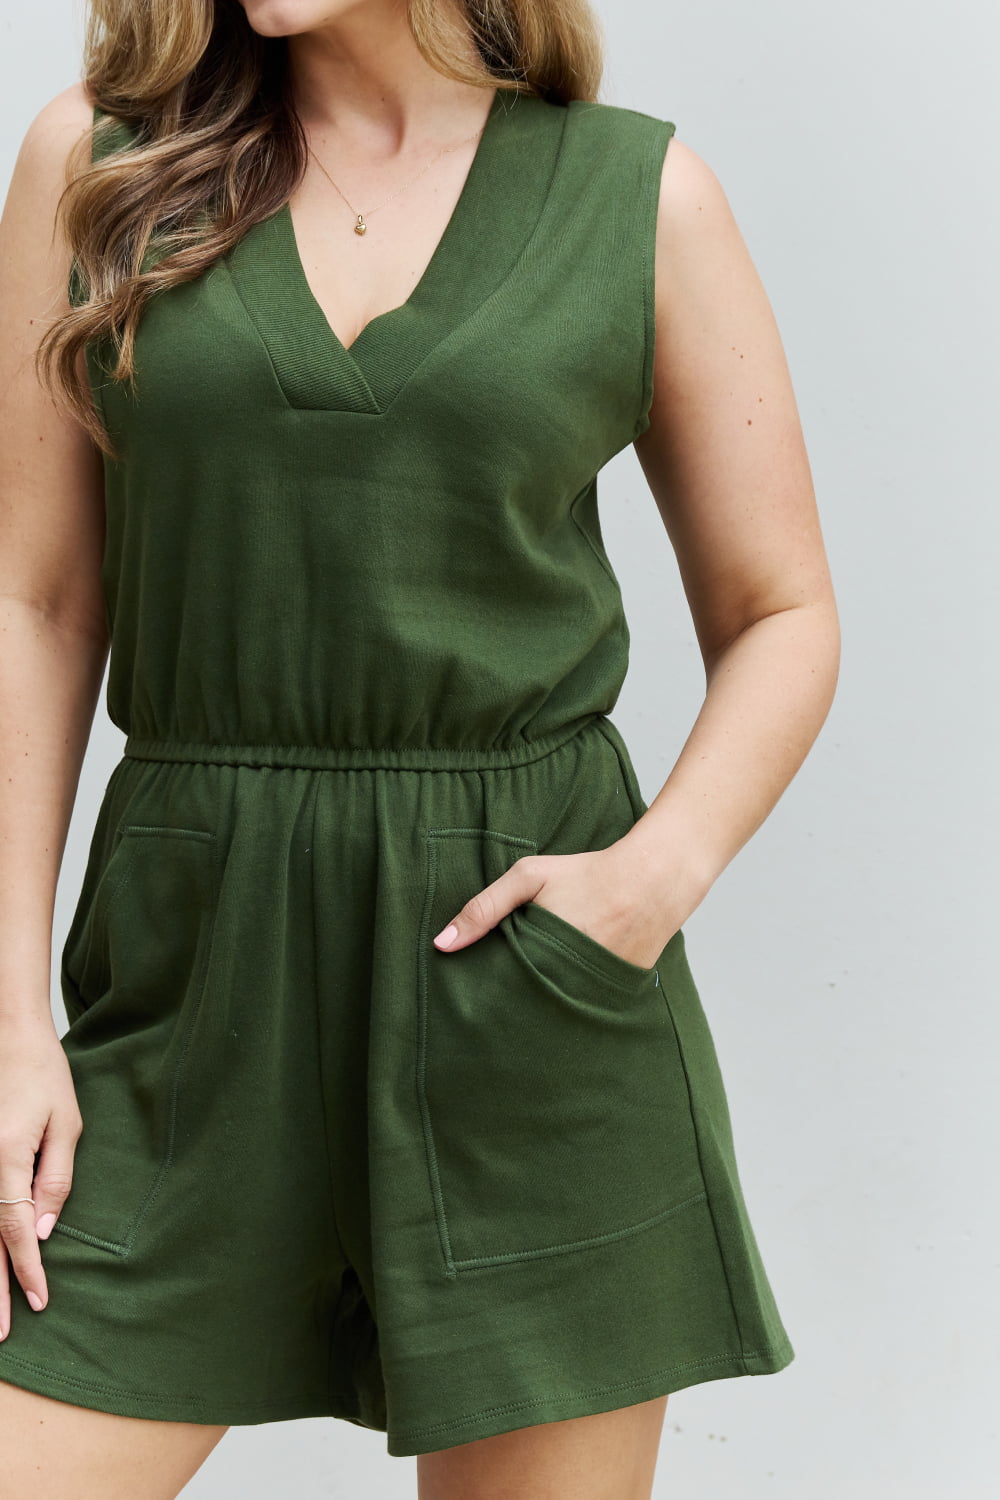 Forever Yours V-Neck Sleeveless Romper in Army Green S-3XL